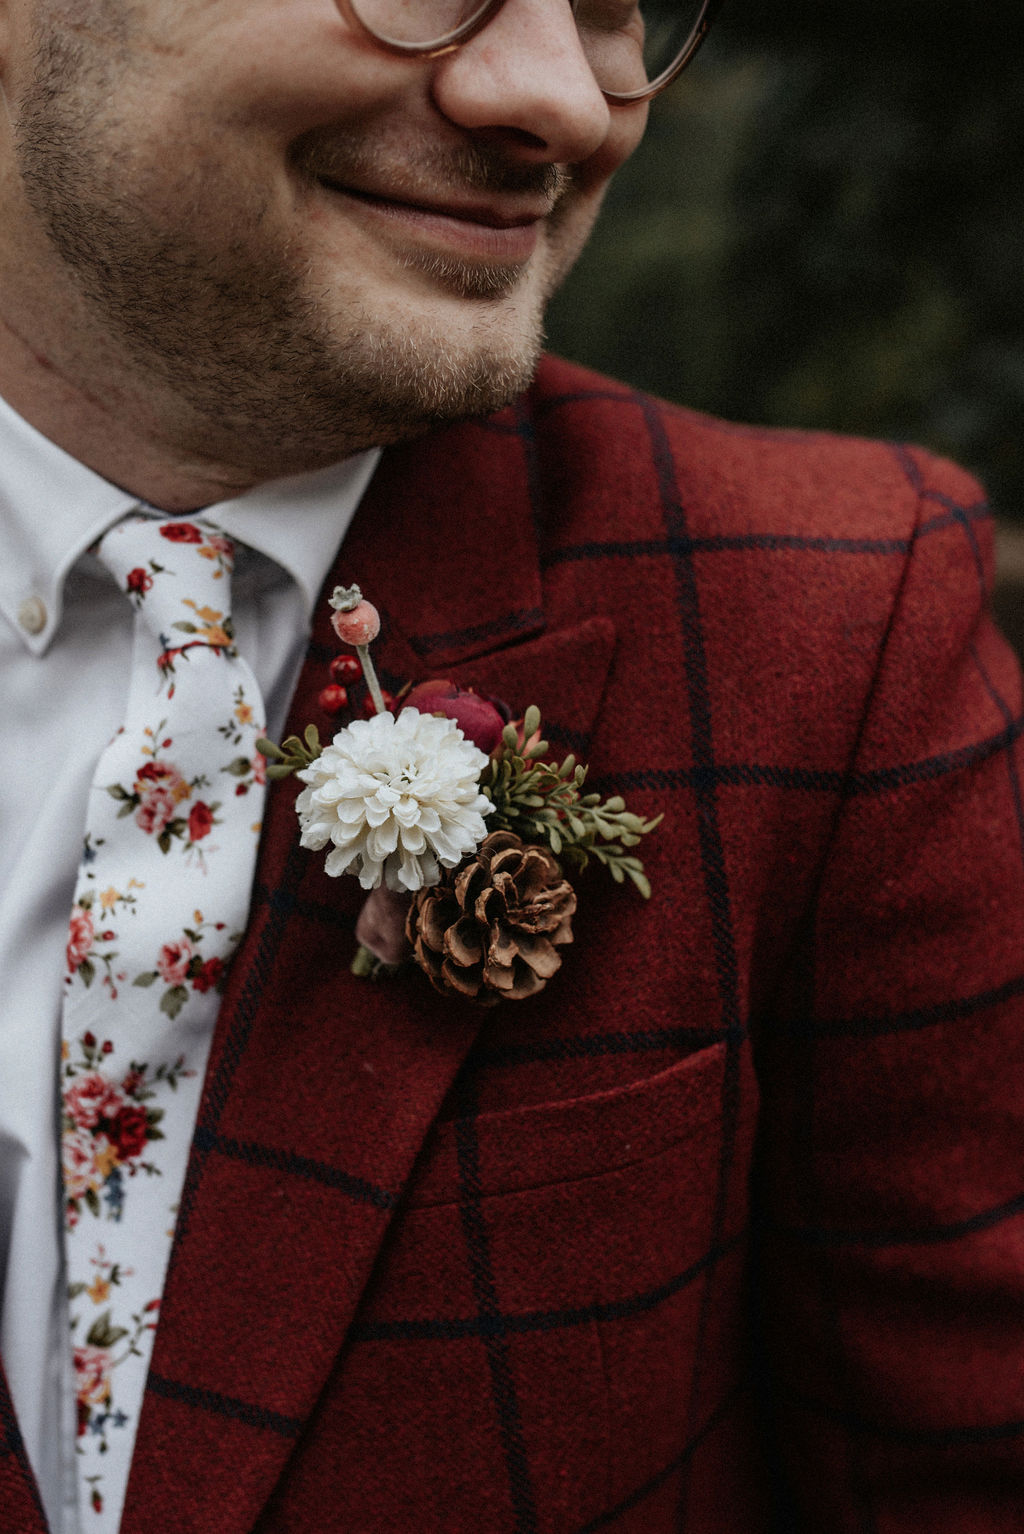 Checkered red wedding tuxedo: Magical Winter Wedding by Meghan Melia Photography featured on Nashville Bride Guide!